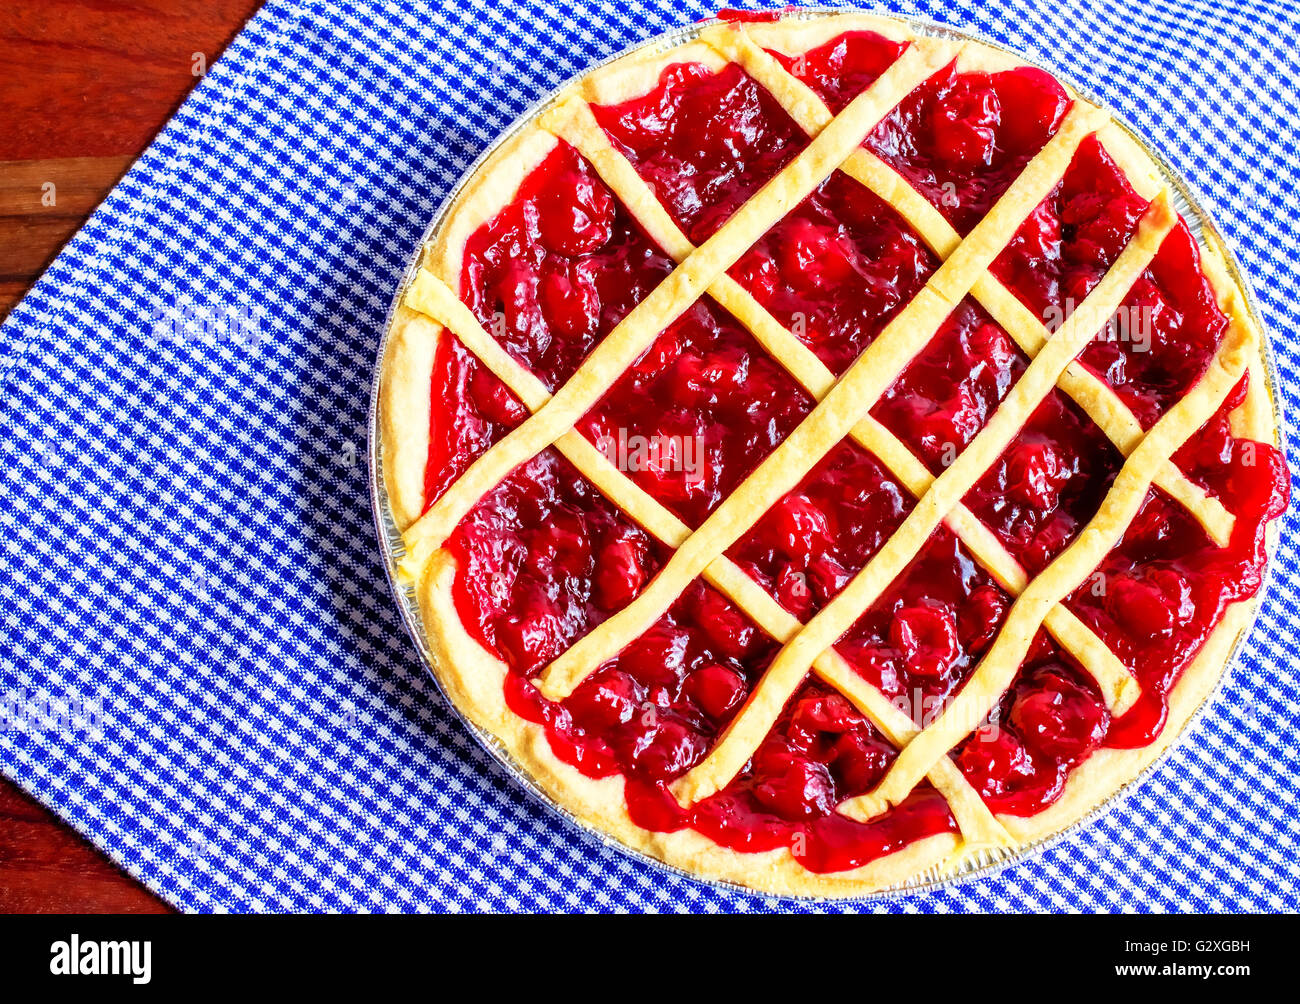 Sweet Cherry pie. Fresh from the oven hot home baked cherry pie on a blue and white gingham background. Stock Photo